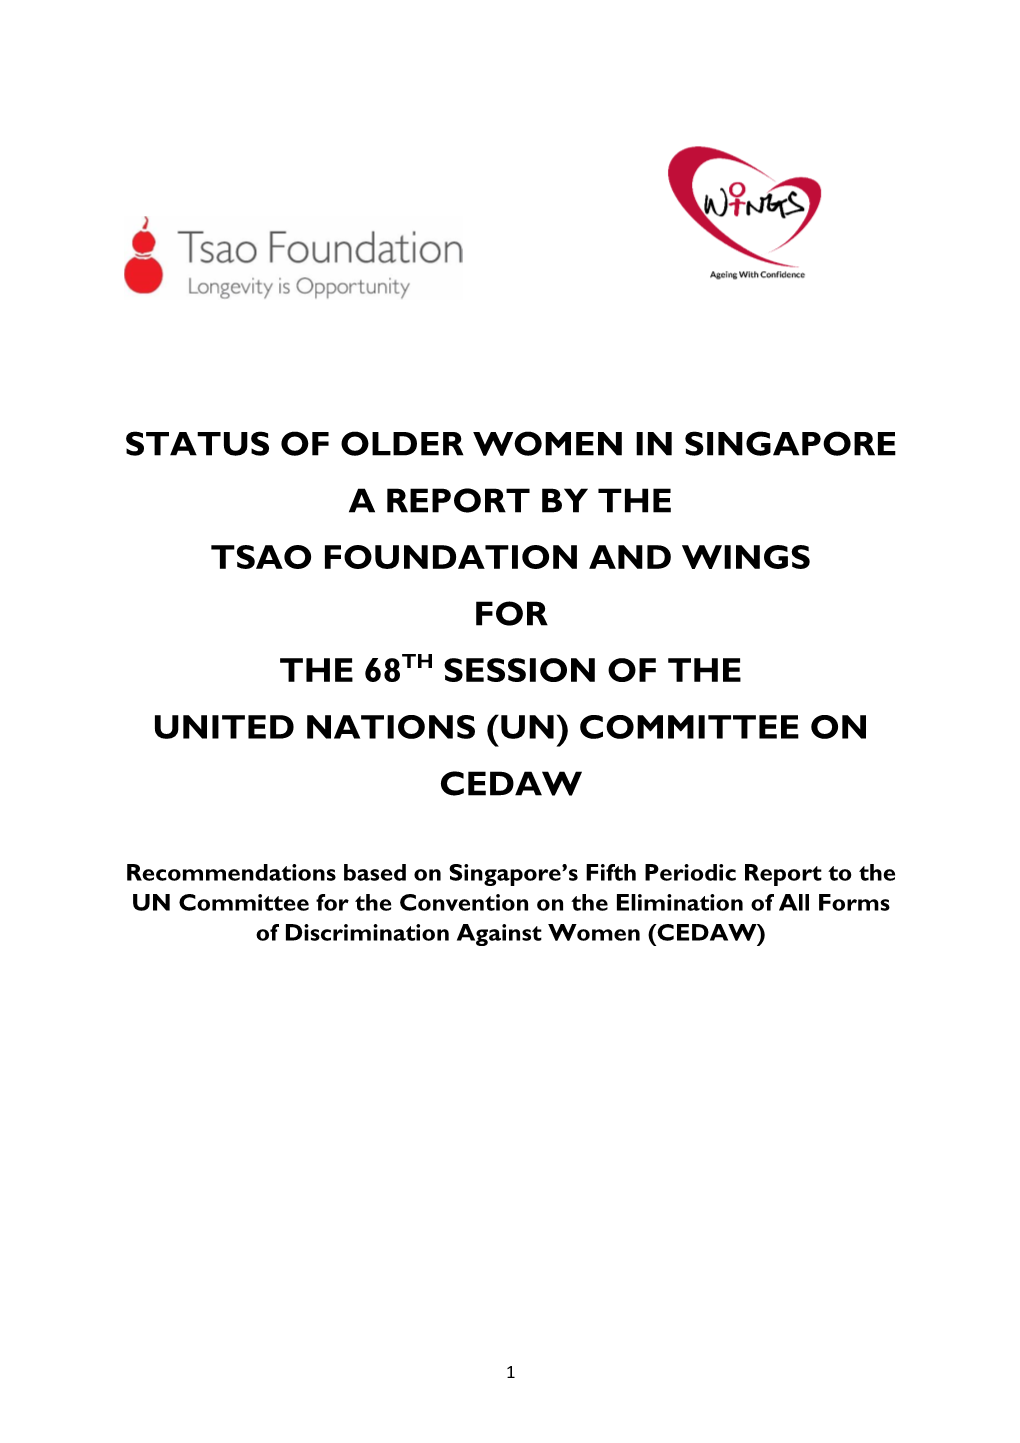 Status of Older Women in Singapore a Report by the Tsao Foundation and Wings for the 68Th Session of the United Nations (Un) Committee on Cedaw